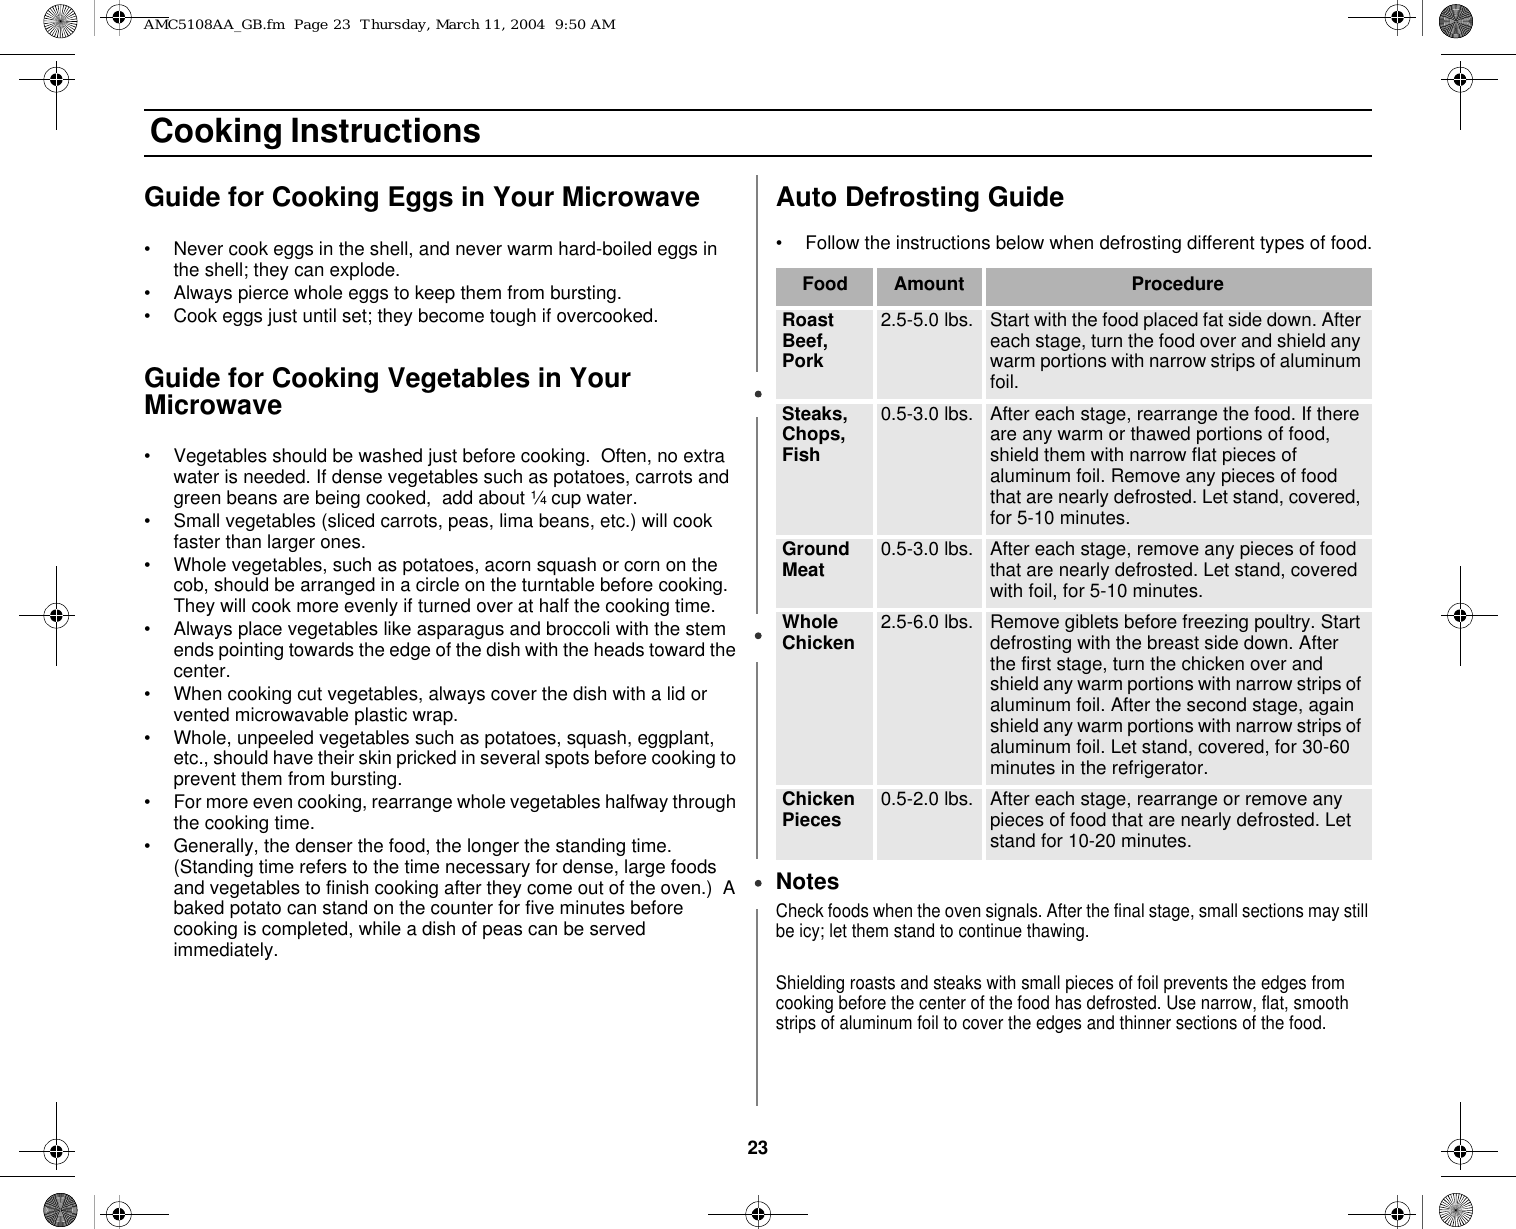 23 Cooking InstructionsGuide for Cooking Eggs in Your Microwave• Never cook eggs in the shell, and never warm hard-boiled eggs in the shell; they can explode.• Always pierce whole eggs to keep them from bursting.• Cook eggs just until set; they become tough if overcooked.Guide for Cooking Vegetables in Your Microwave• Vegetables should be washed just before cooking.  Often, no extra water is needed. If dense vegetables such as potatoes, carrots and green beans are being cooked,  add about ¼ cup water.• Small vegetables (sliced carrots, peas, lima beans, etc.) will cook faster than larger ones.• Whole vegetables, such as potatoes, acorn squash or corn on the cob, should be arranged in a circle on the turntable before cooking.  They will cook more evenly if turned over at half the cooking time.• Always place vegetables like asparagus and broccoli with the stem ends pointing towards the edge of the dish with the heads toward the center.• When cooking cut vegetables, always cover the dish with a lid or vented microwavable plastic wrap.   • Whole, unpeeled vegetables such as potatoes, squash, eggplant, etc., should have their skin pricked in several spots before cooking to prevent them from bursting.• For more even cooking, rearrange whole vegetables halfway through the cooking time.• Generally, the denser the food, the longer the standing time.  (Standing time refers to the time necessary for dense, large foods and vegetables to finish cooking after they come out of the oven.)  A baked potato can stand on the counter for five minutes before cooking is completed, while a dish of peas can be served immediately.Auto Defrosting Guide• Follow the instructions below when defrosting different types of food.NotesCheck foods when the oven signals. After the final stage, small sections may still be icy; let them stand to continue thawing.Shielding roasts and steaks with small pieces of foil prevents the edges from cooking before the center of the food has defrosted. Use narrow, flat, smooth strips of aluminum foil to cover the edges and thinner sections of the food.Food Amount ProcedureRoast Beef, Pork2.5-5.0 lbs. Start with the food placed fat side down. After each stage, turn the food over and shield any warm portions with narrow strips of aluminum foil.Steaks, Chops, Fish0.5-3.0 lbs. After each stage, rearrange the food. If there are any warm or thawed portions of food, shield them with narrow flat pieces of aluminum foil. Remove any pieces of food that are nearly defrosted. Let stand, covered, for 5-10 minutes.Ground Meat 0.5-3.0 lbs. After each stage, remove any pieces of food that are nearly defrosted. Let stand, covered with foil, for 5-10 minutes.Whole Chicken 2.5-6.0 lbs. Remove giblets before freezing poultry. Start defrosting with the breast side down. After the first stage, turn the chicken over and shield any warm portions with narrow strips of aluminum foil. After the second stage, again shield any warm portions with narrow strips of aluminum foil. Let stand, covered, for 30-60 minutes in the refrigerator.Chicken Pieces 0.5-2.0 lbs. After each stage, rearrange or remove any pieces of food that are nearly defrosted. Let stand for 10-20 minutes.AMC5108AA_GB.fm  Page 23  Thursday, March 11, 2004  9:50 AM